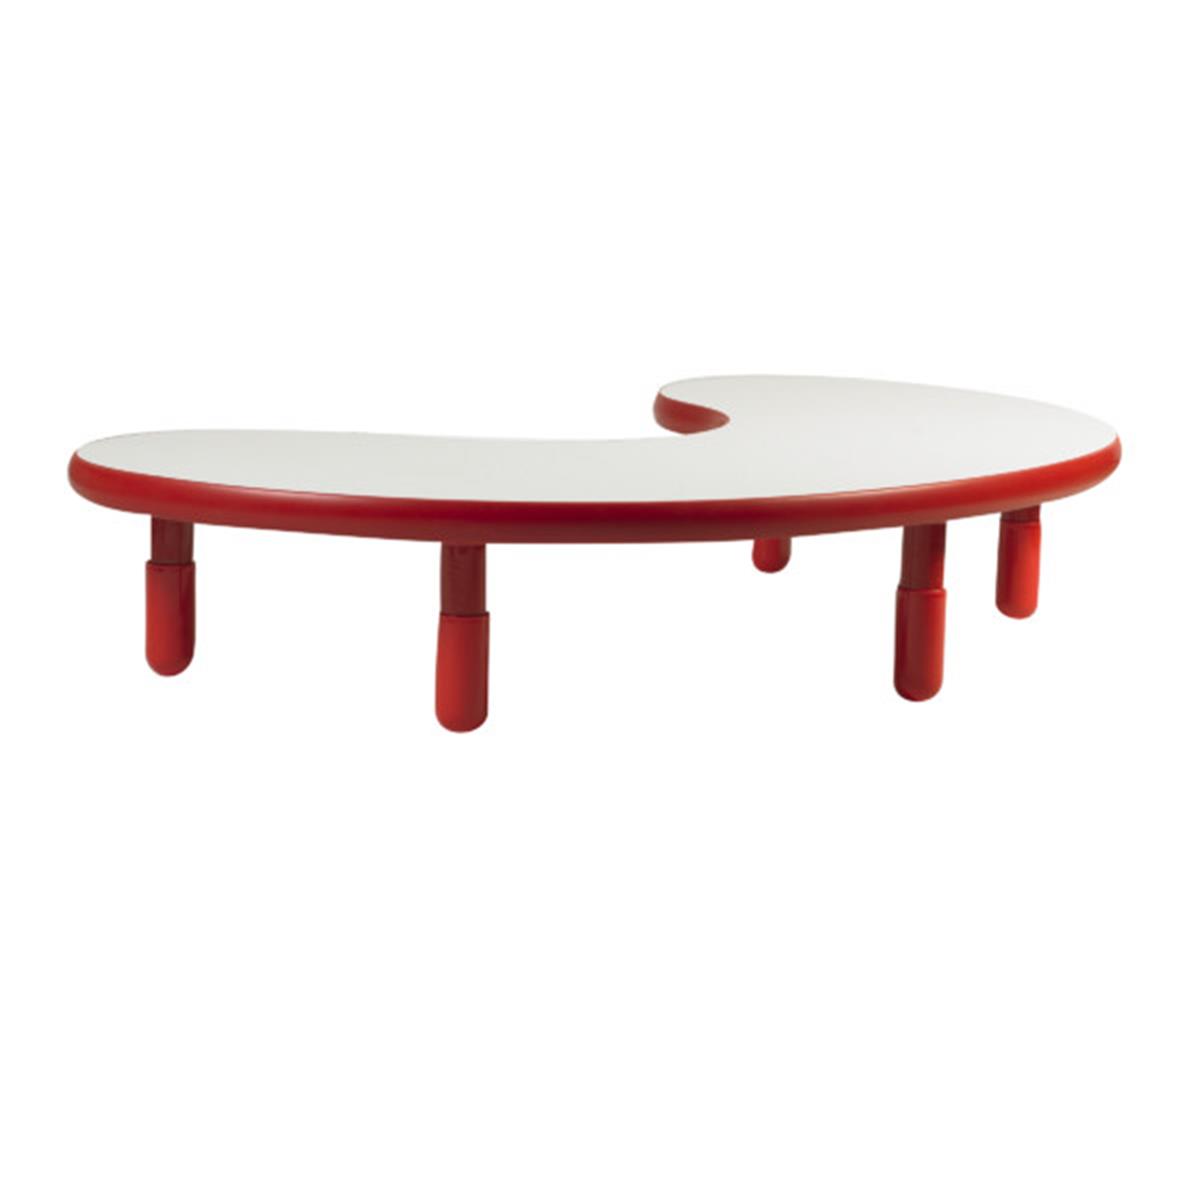 Ab739kpr20 38 X 65 In. Teacher & Kidney Baseline Table With 20 In. Legs, Candy Apple Red